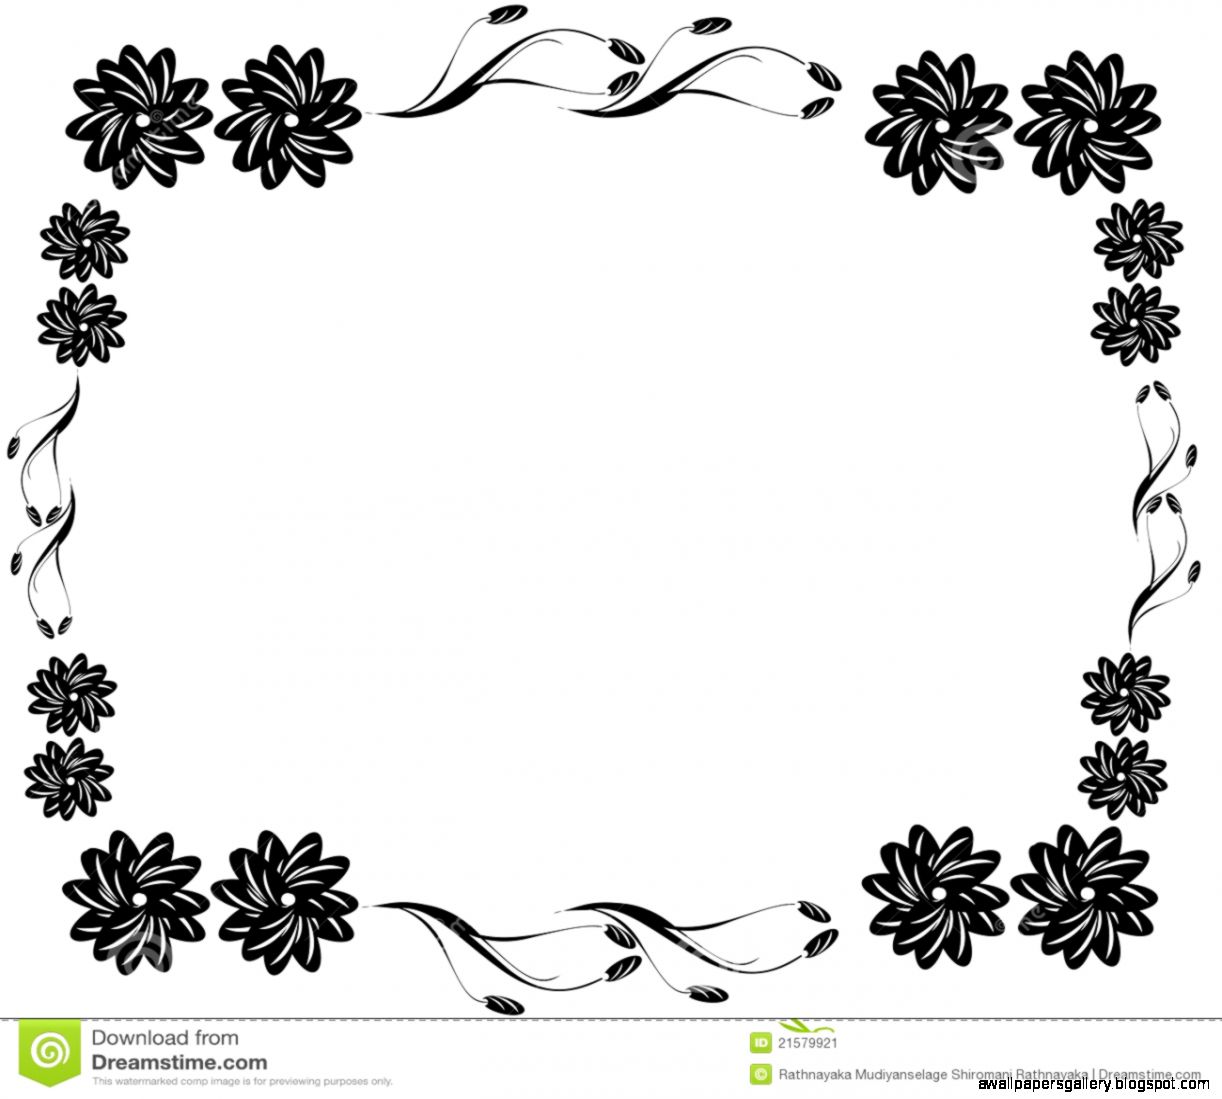 Flower Border Black And White | Wallpapers Gallery